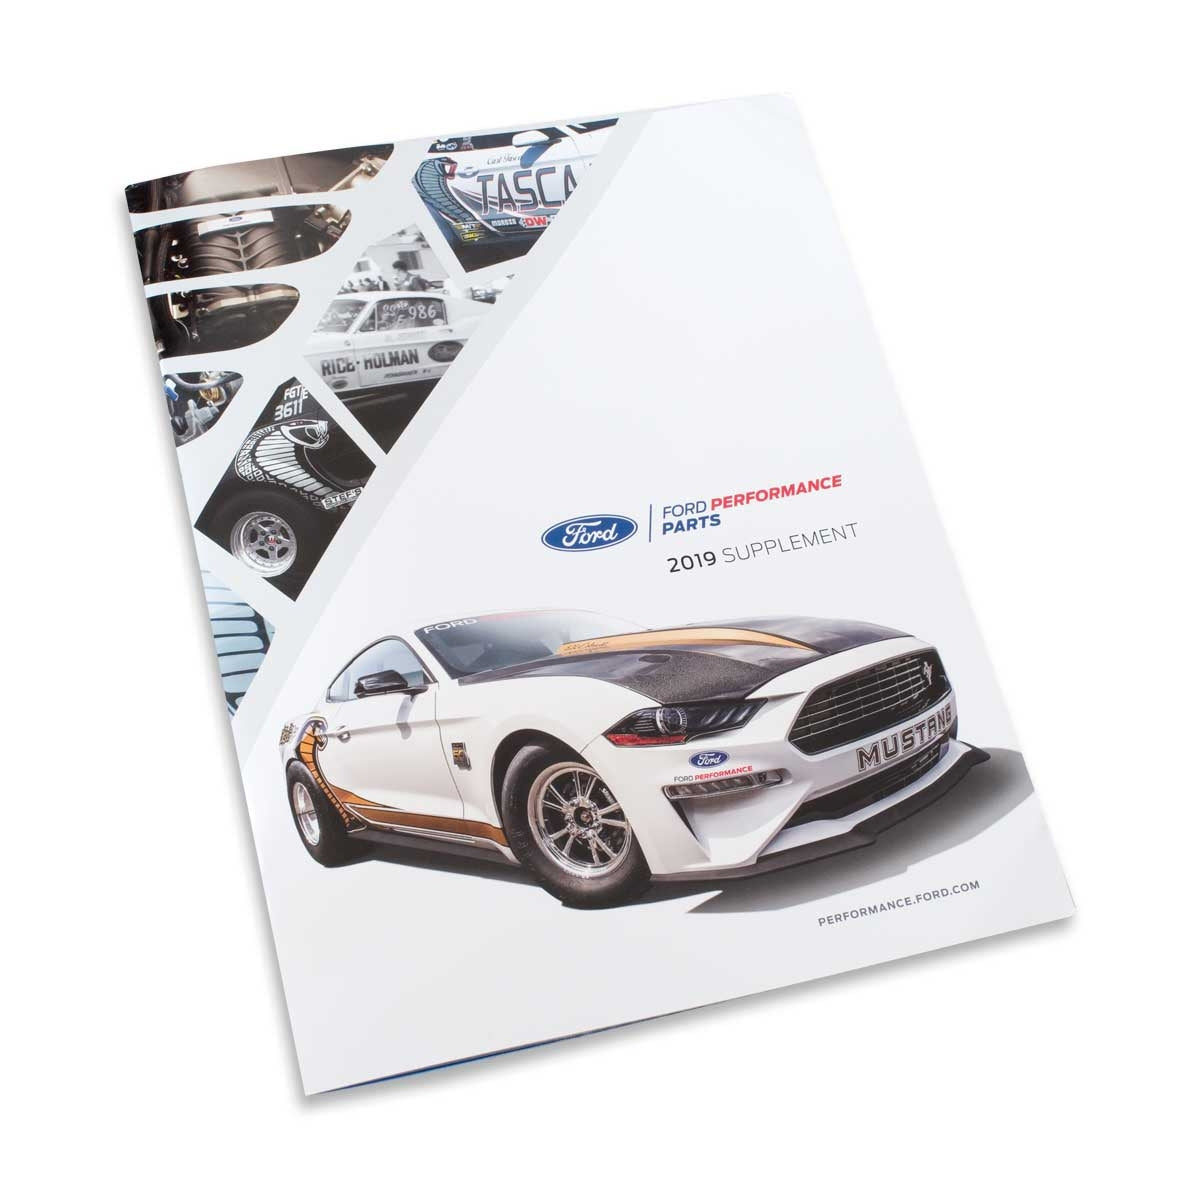 2019 Ford Performance Mustang Focus F150 Parts Supplement - 53 Pages